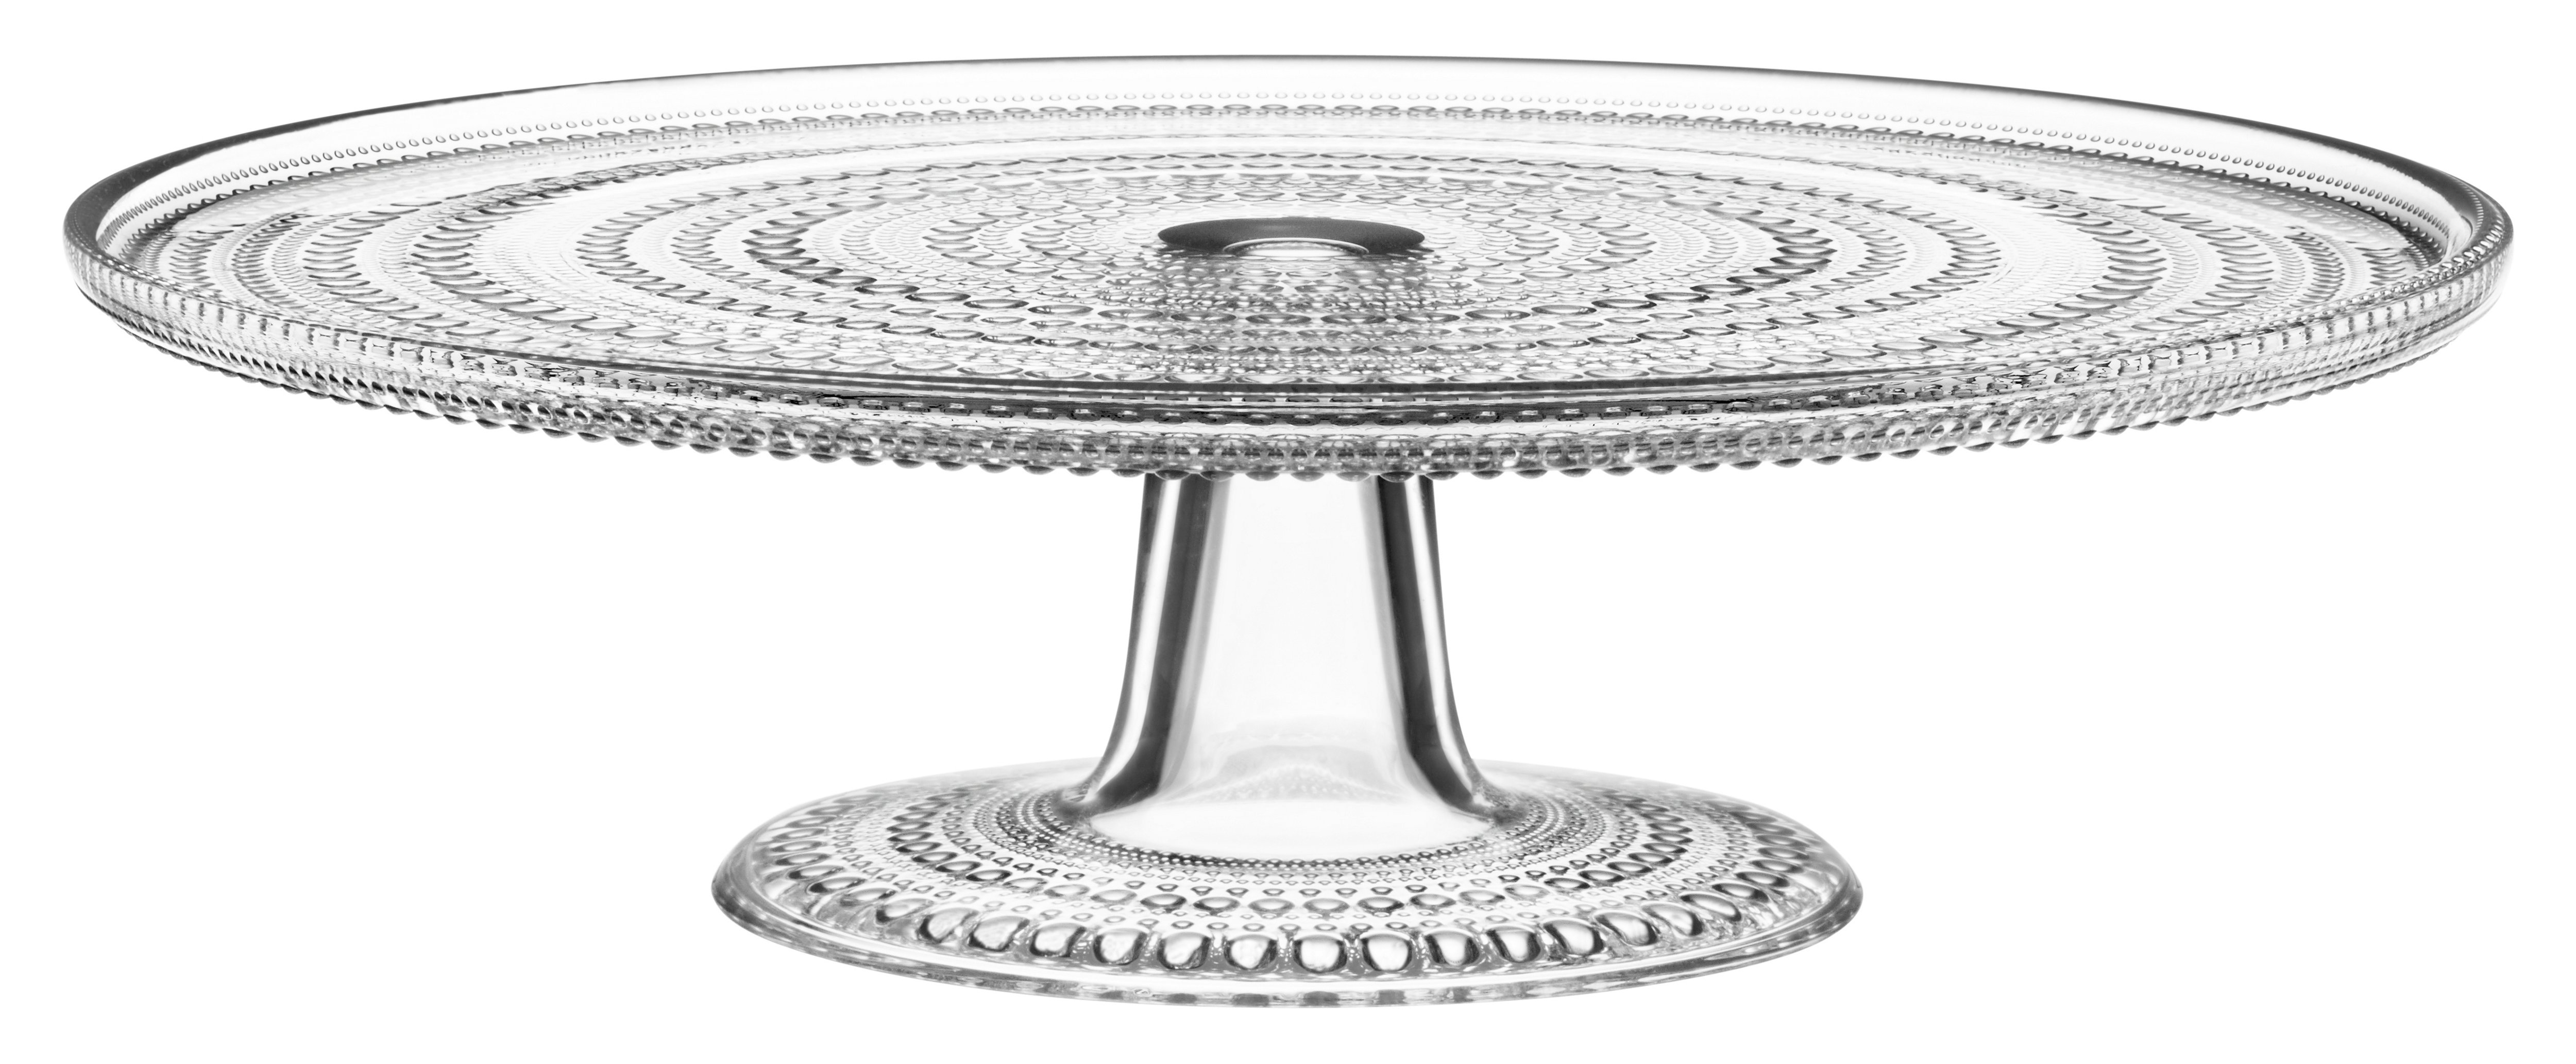 Cake Stand Single Tier – 13 inch Black Chrome Finish - House2home